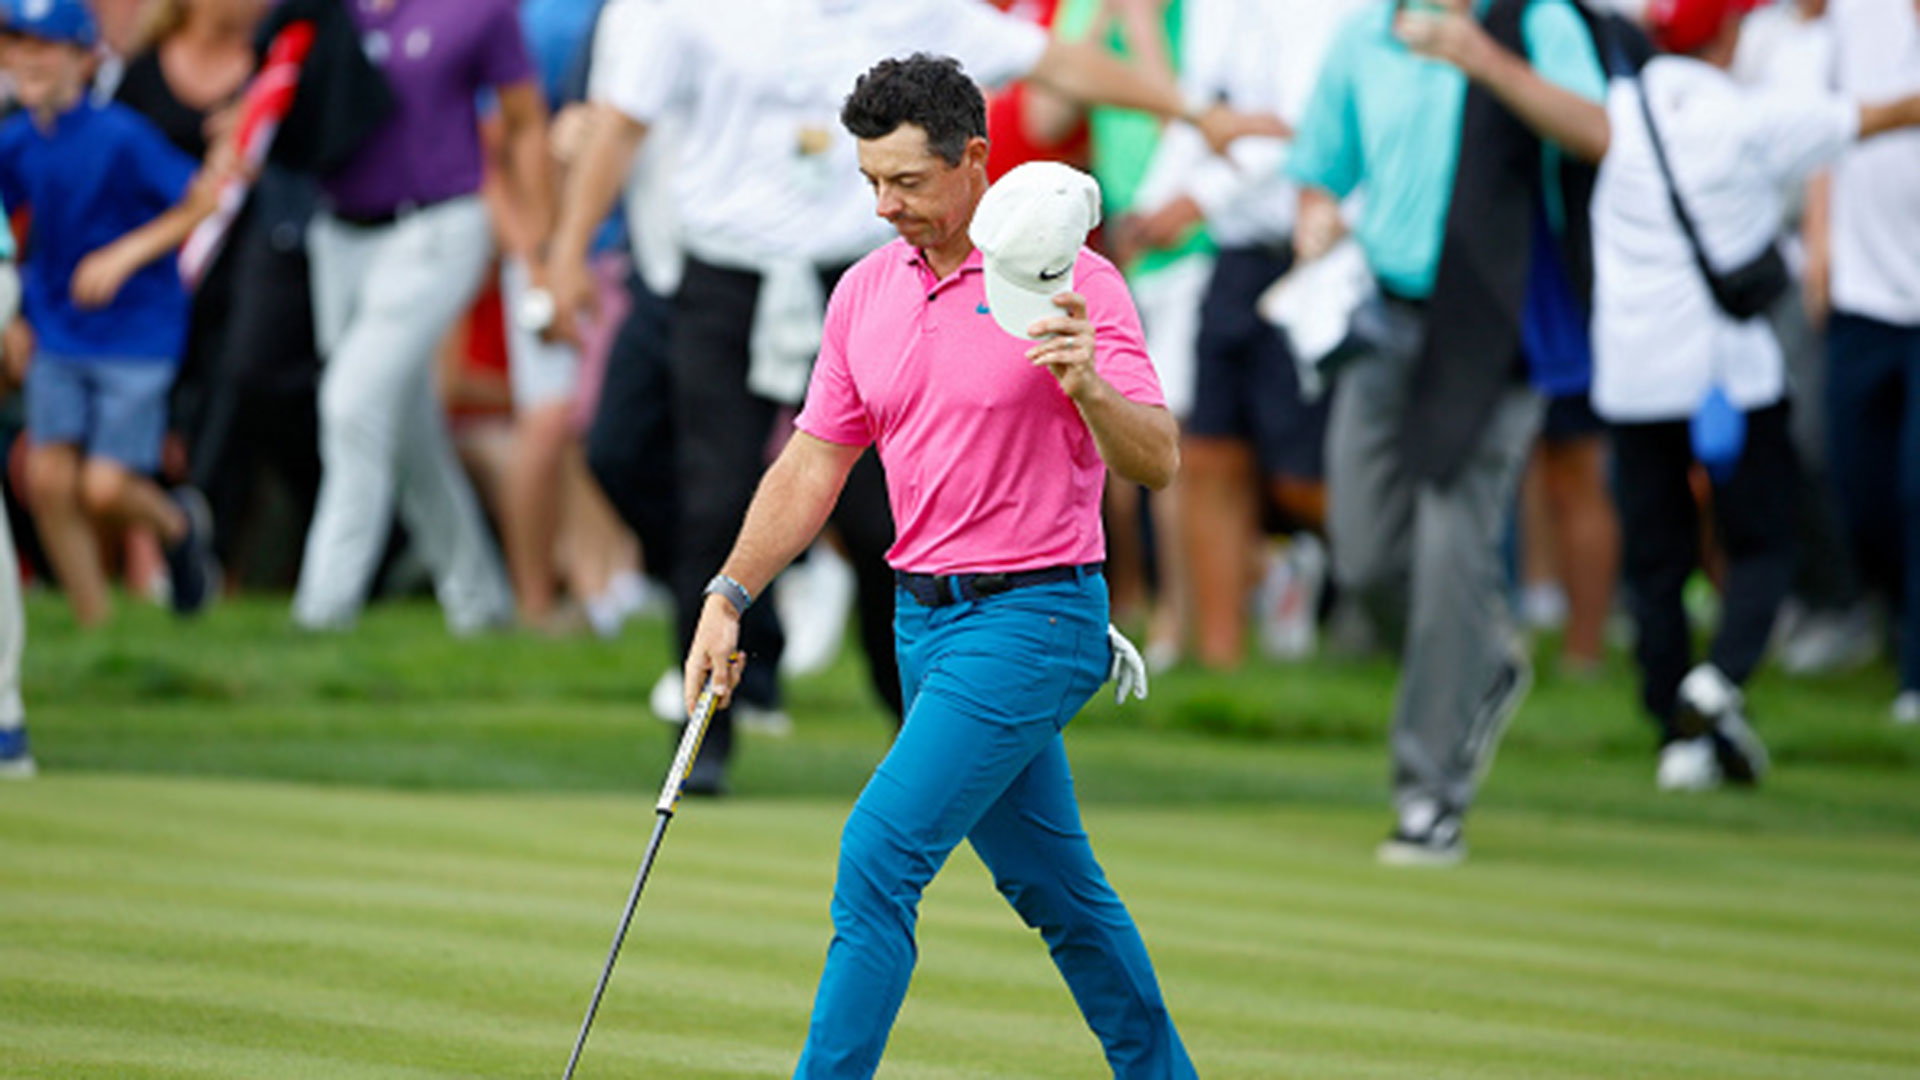 McIlroy praises Canadian Open after win: 'It's up there with the best tour events we play'